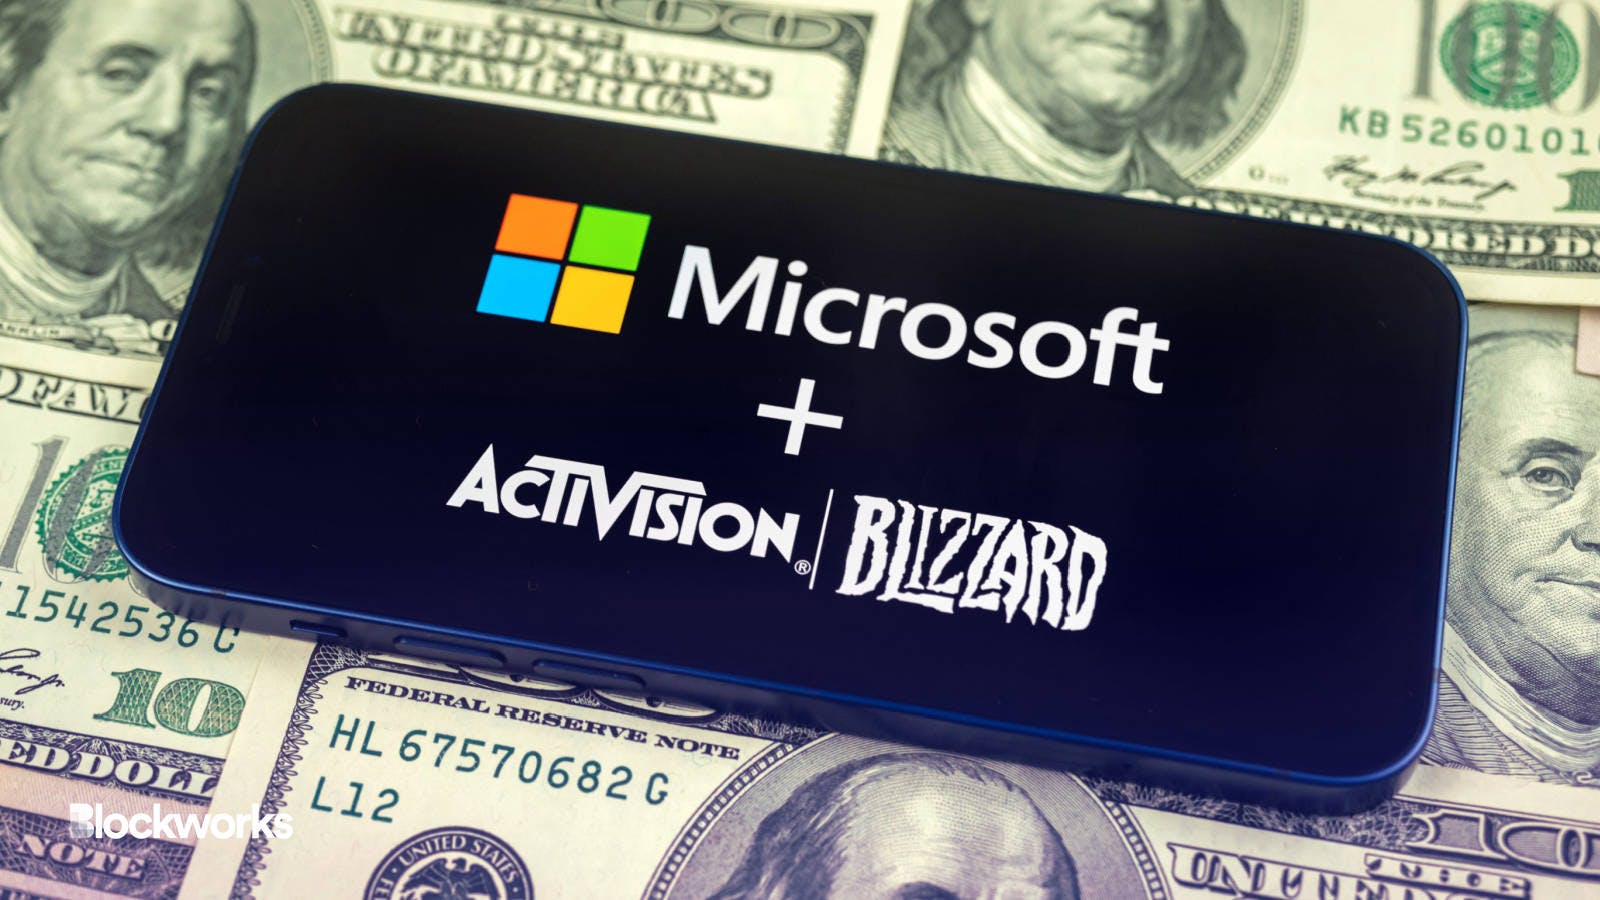 Microsoft buys Activision Blizzard for $69 billion, finally